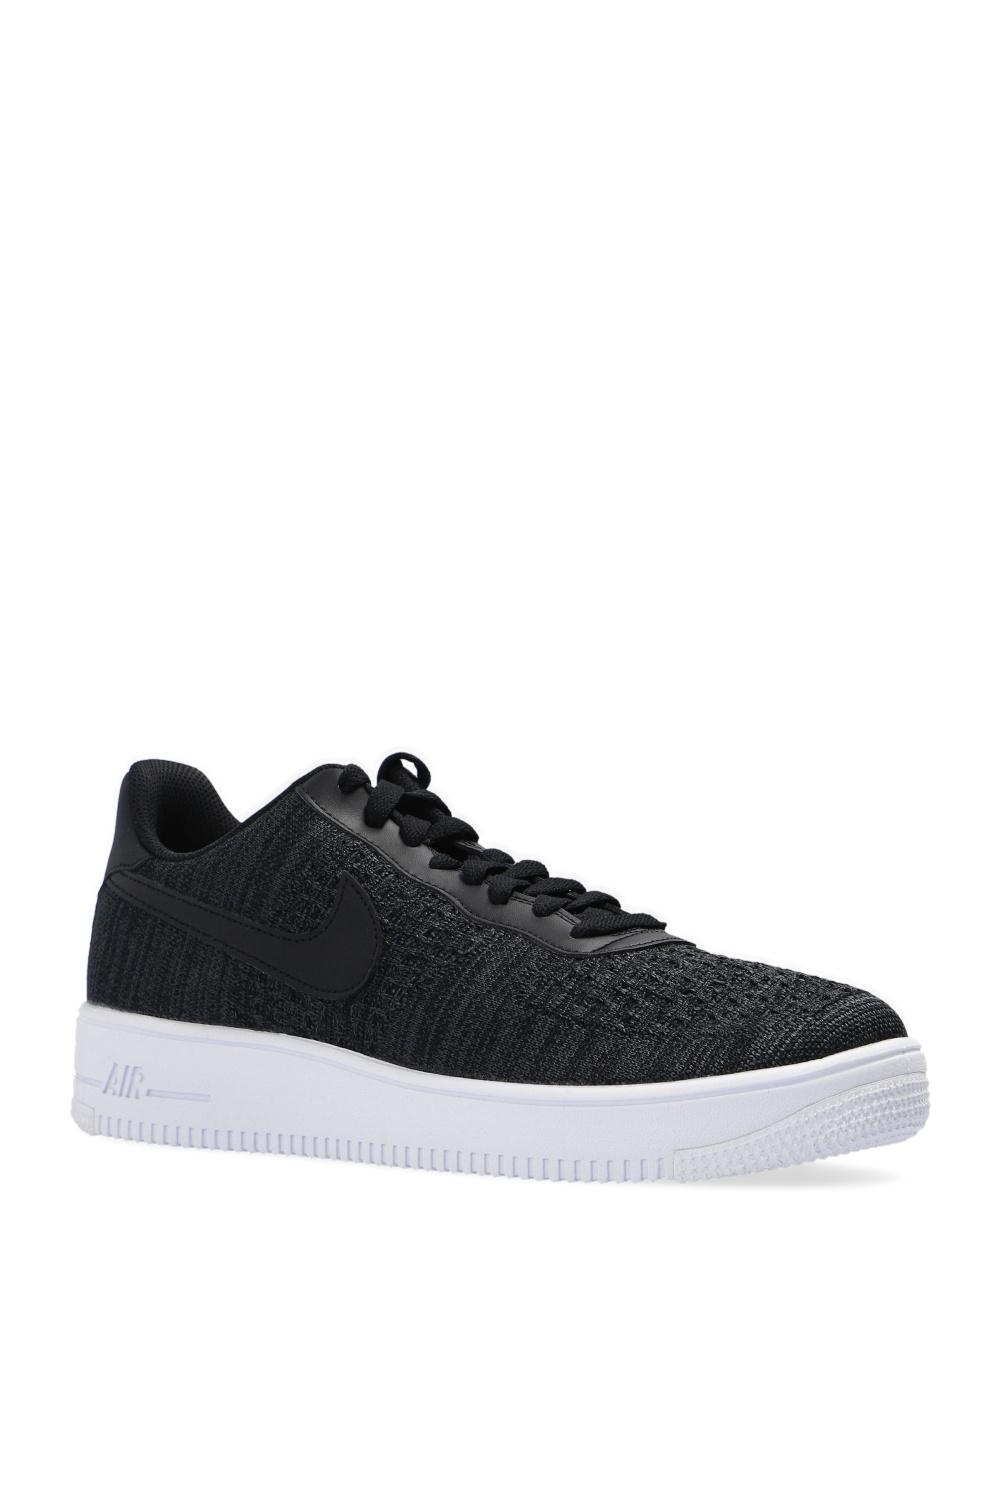 Nike Synthetic Air Force 1 Flyknit 2.0 in Black,White,Anthracite ...